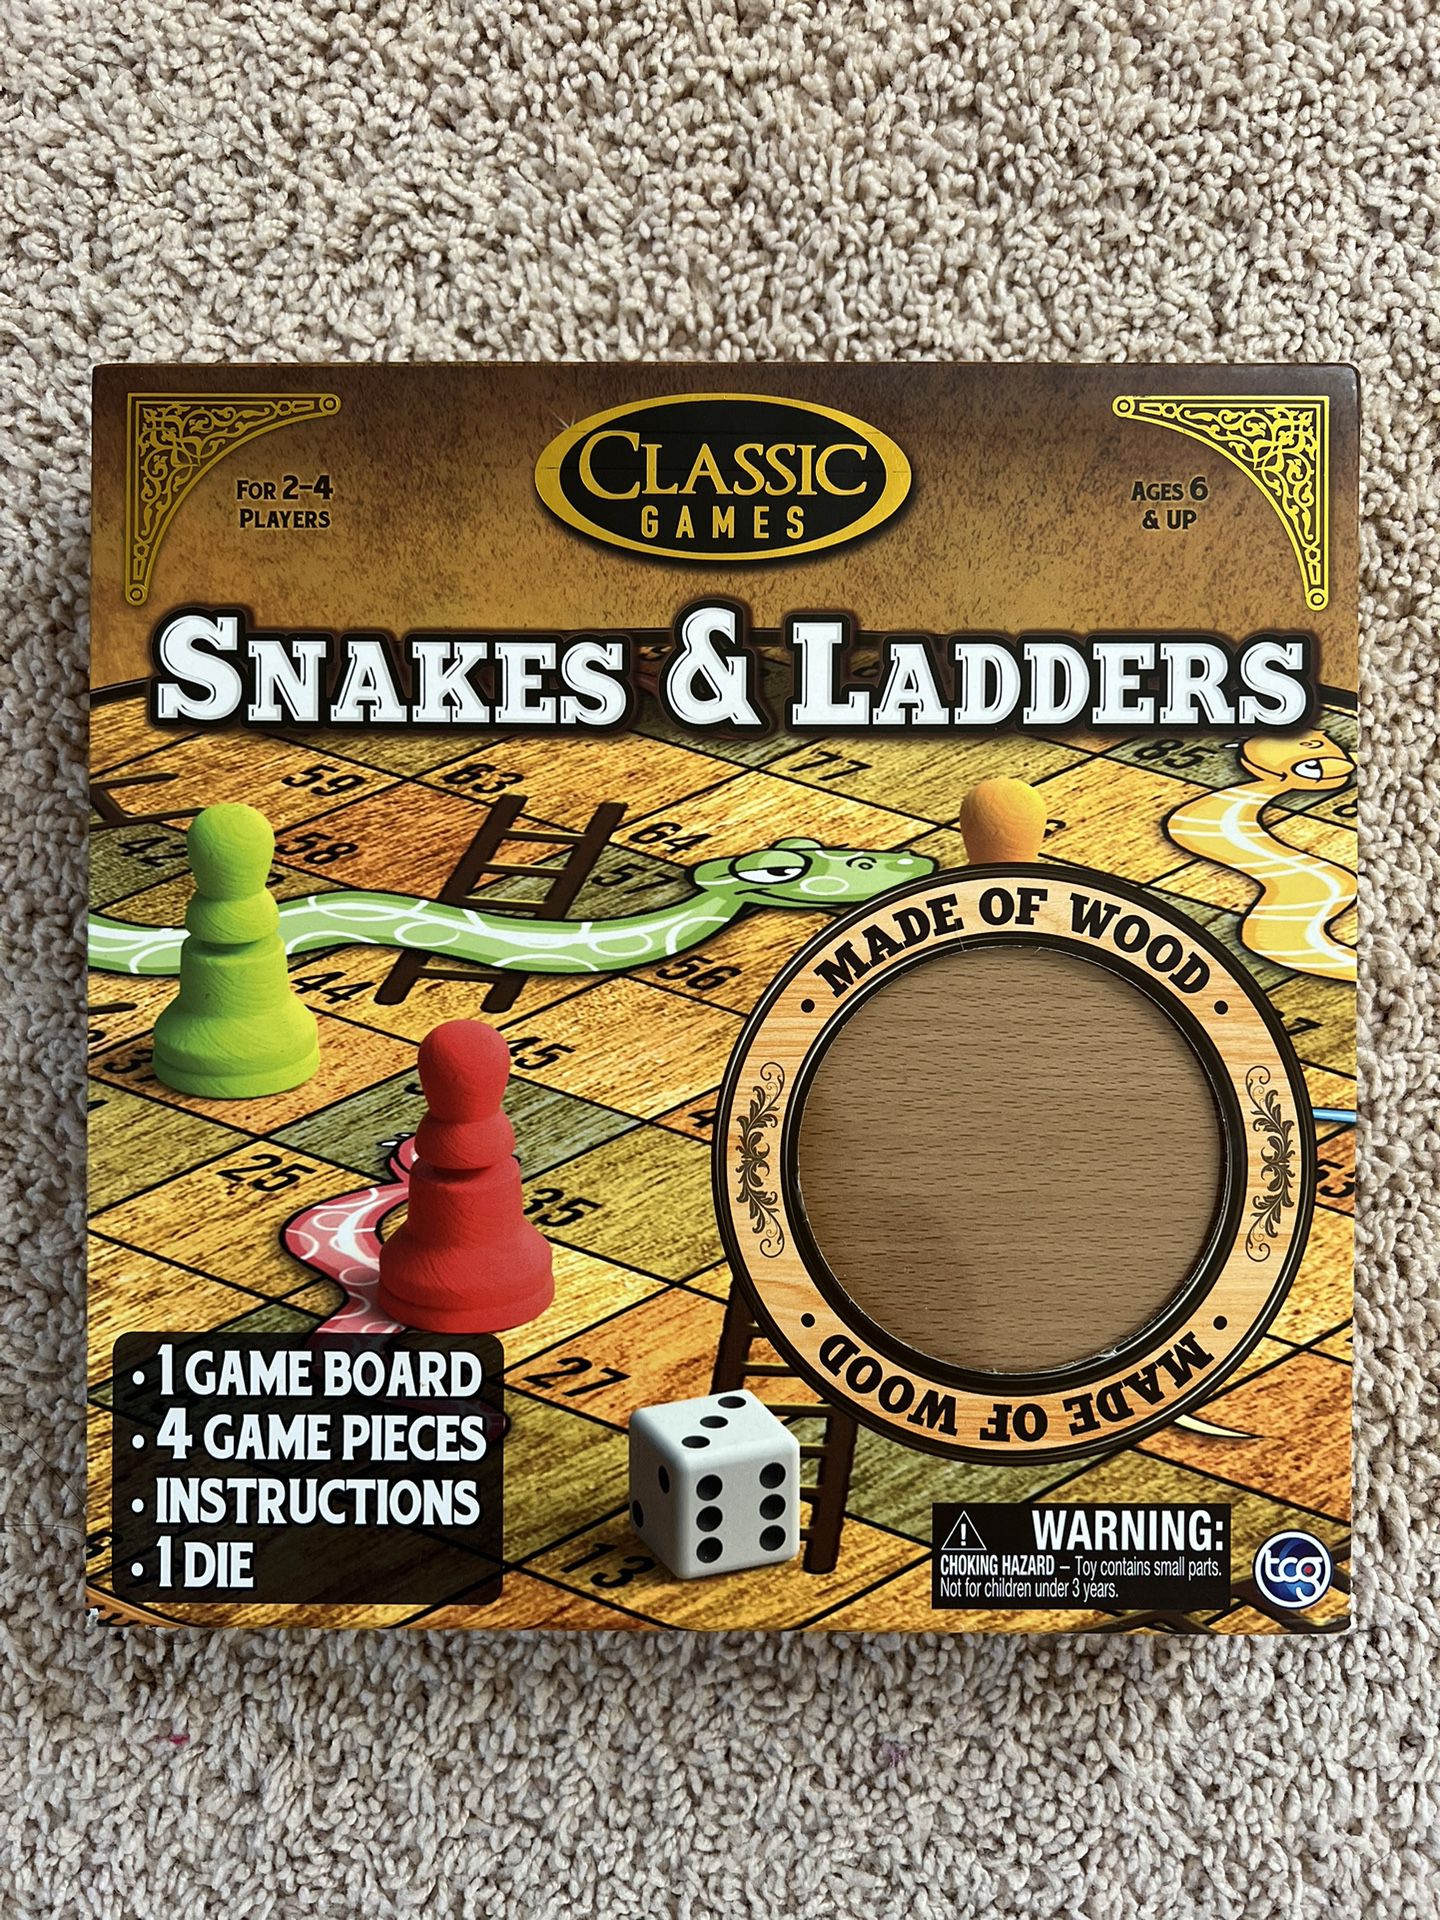 Snakes and ladders Wooden Board Game 